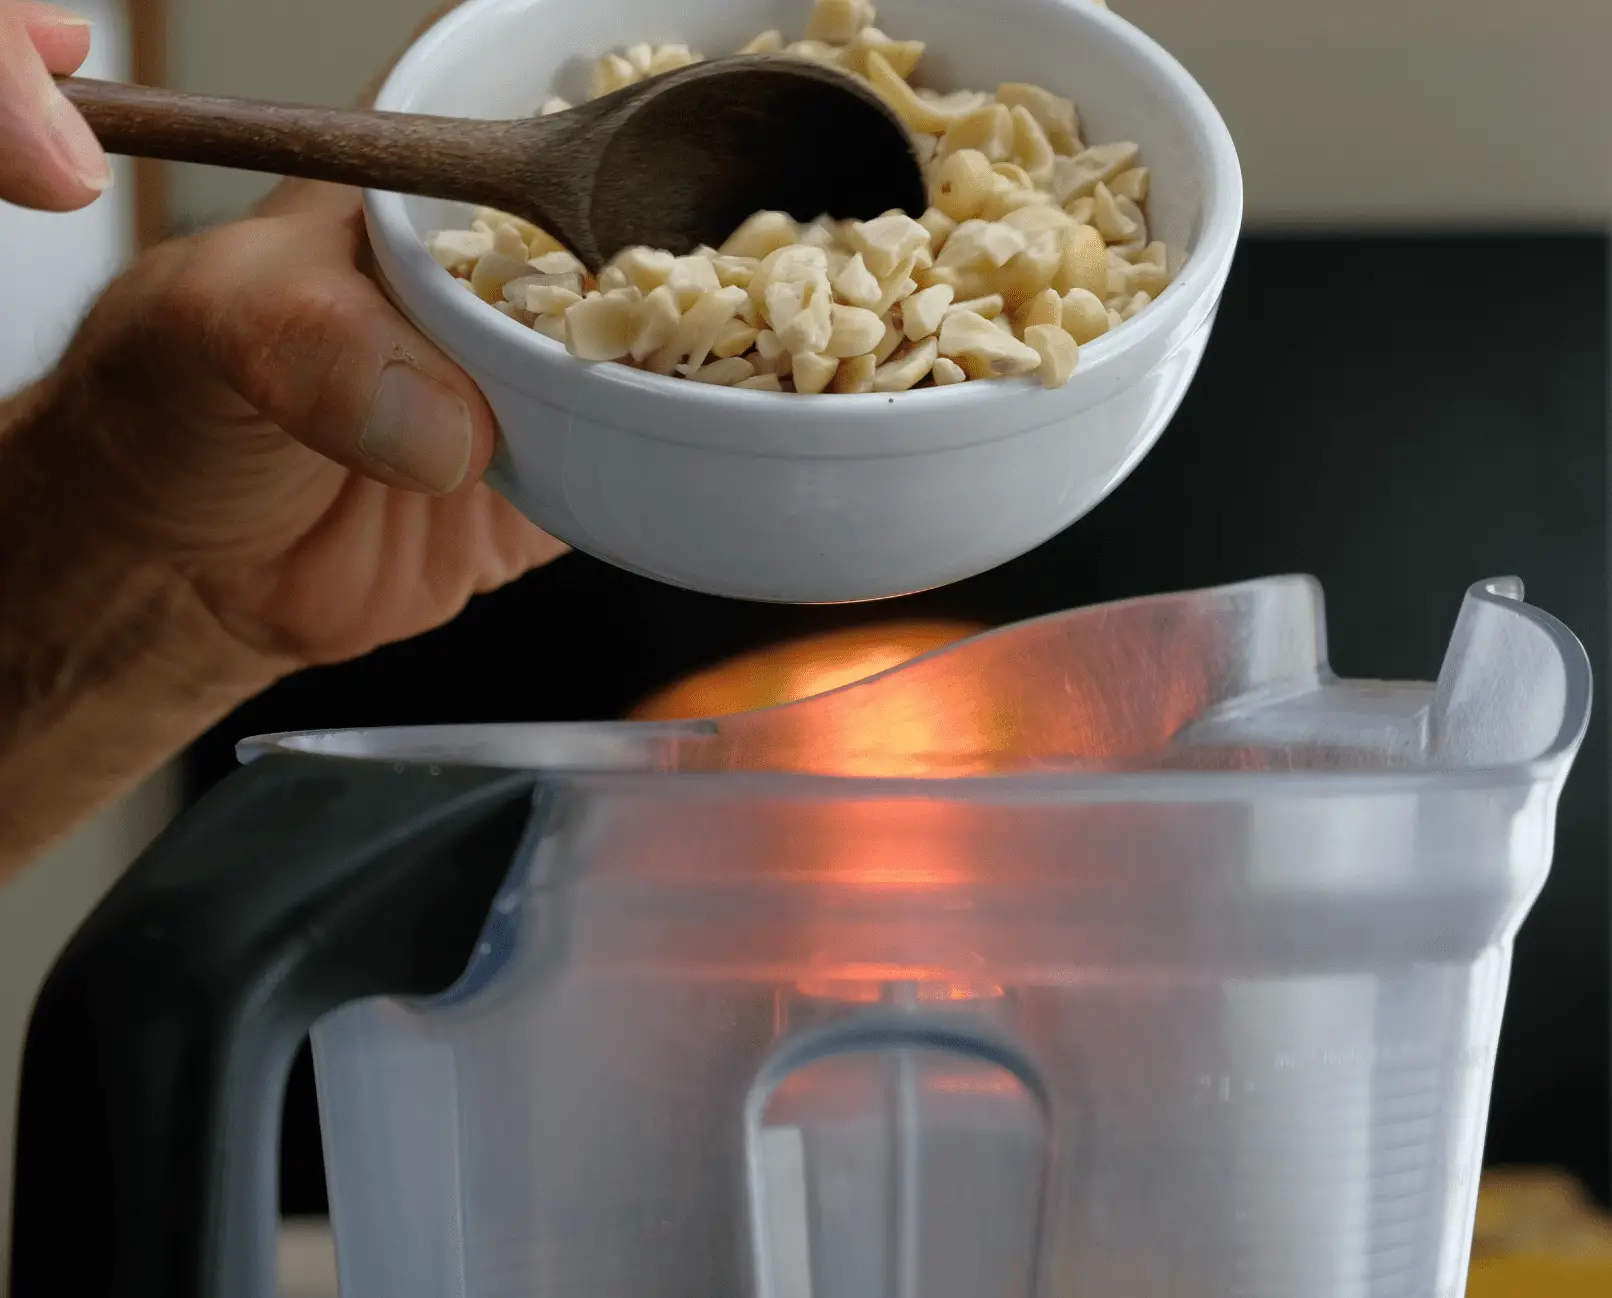 ADDING BLANCHED CASHEWS TO BLENDER